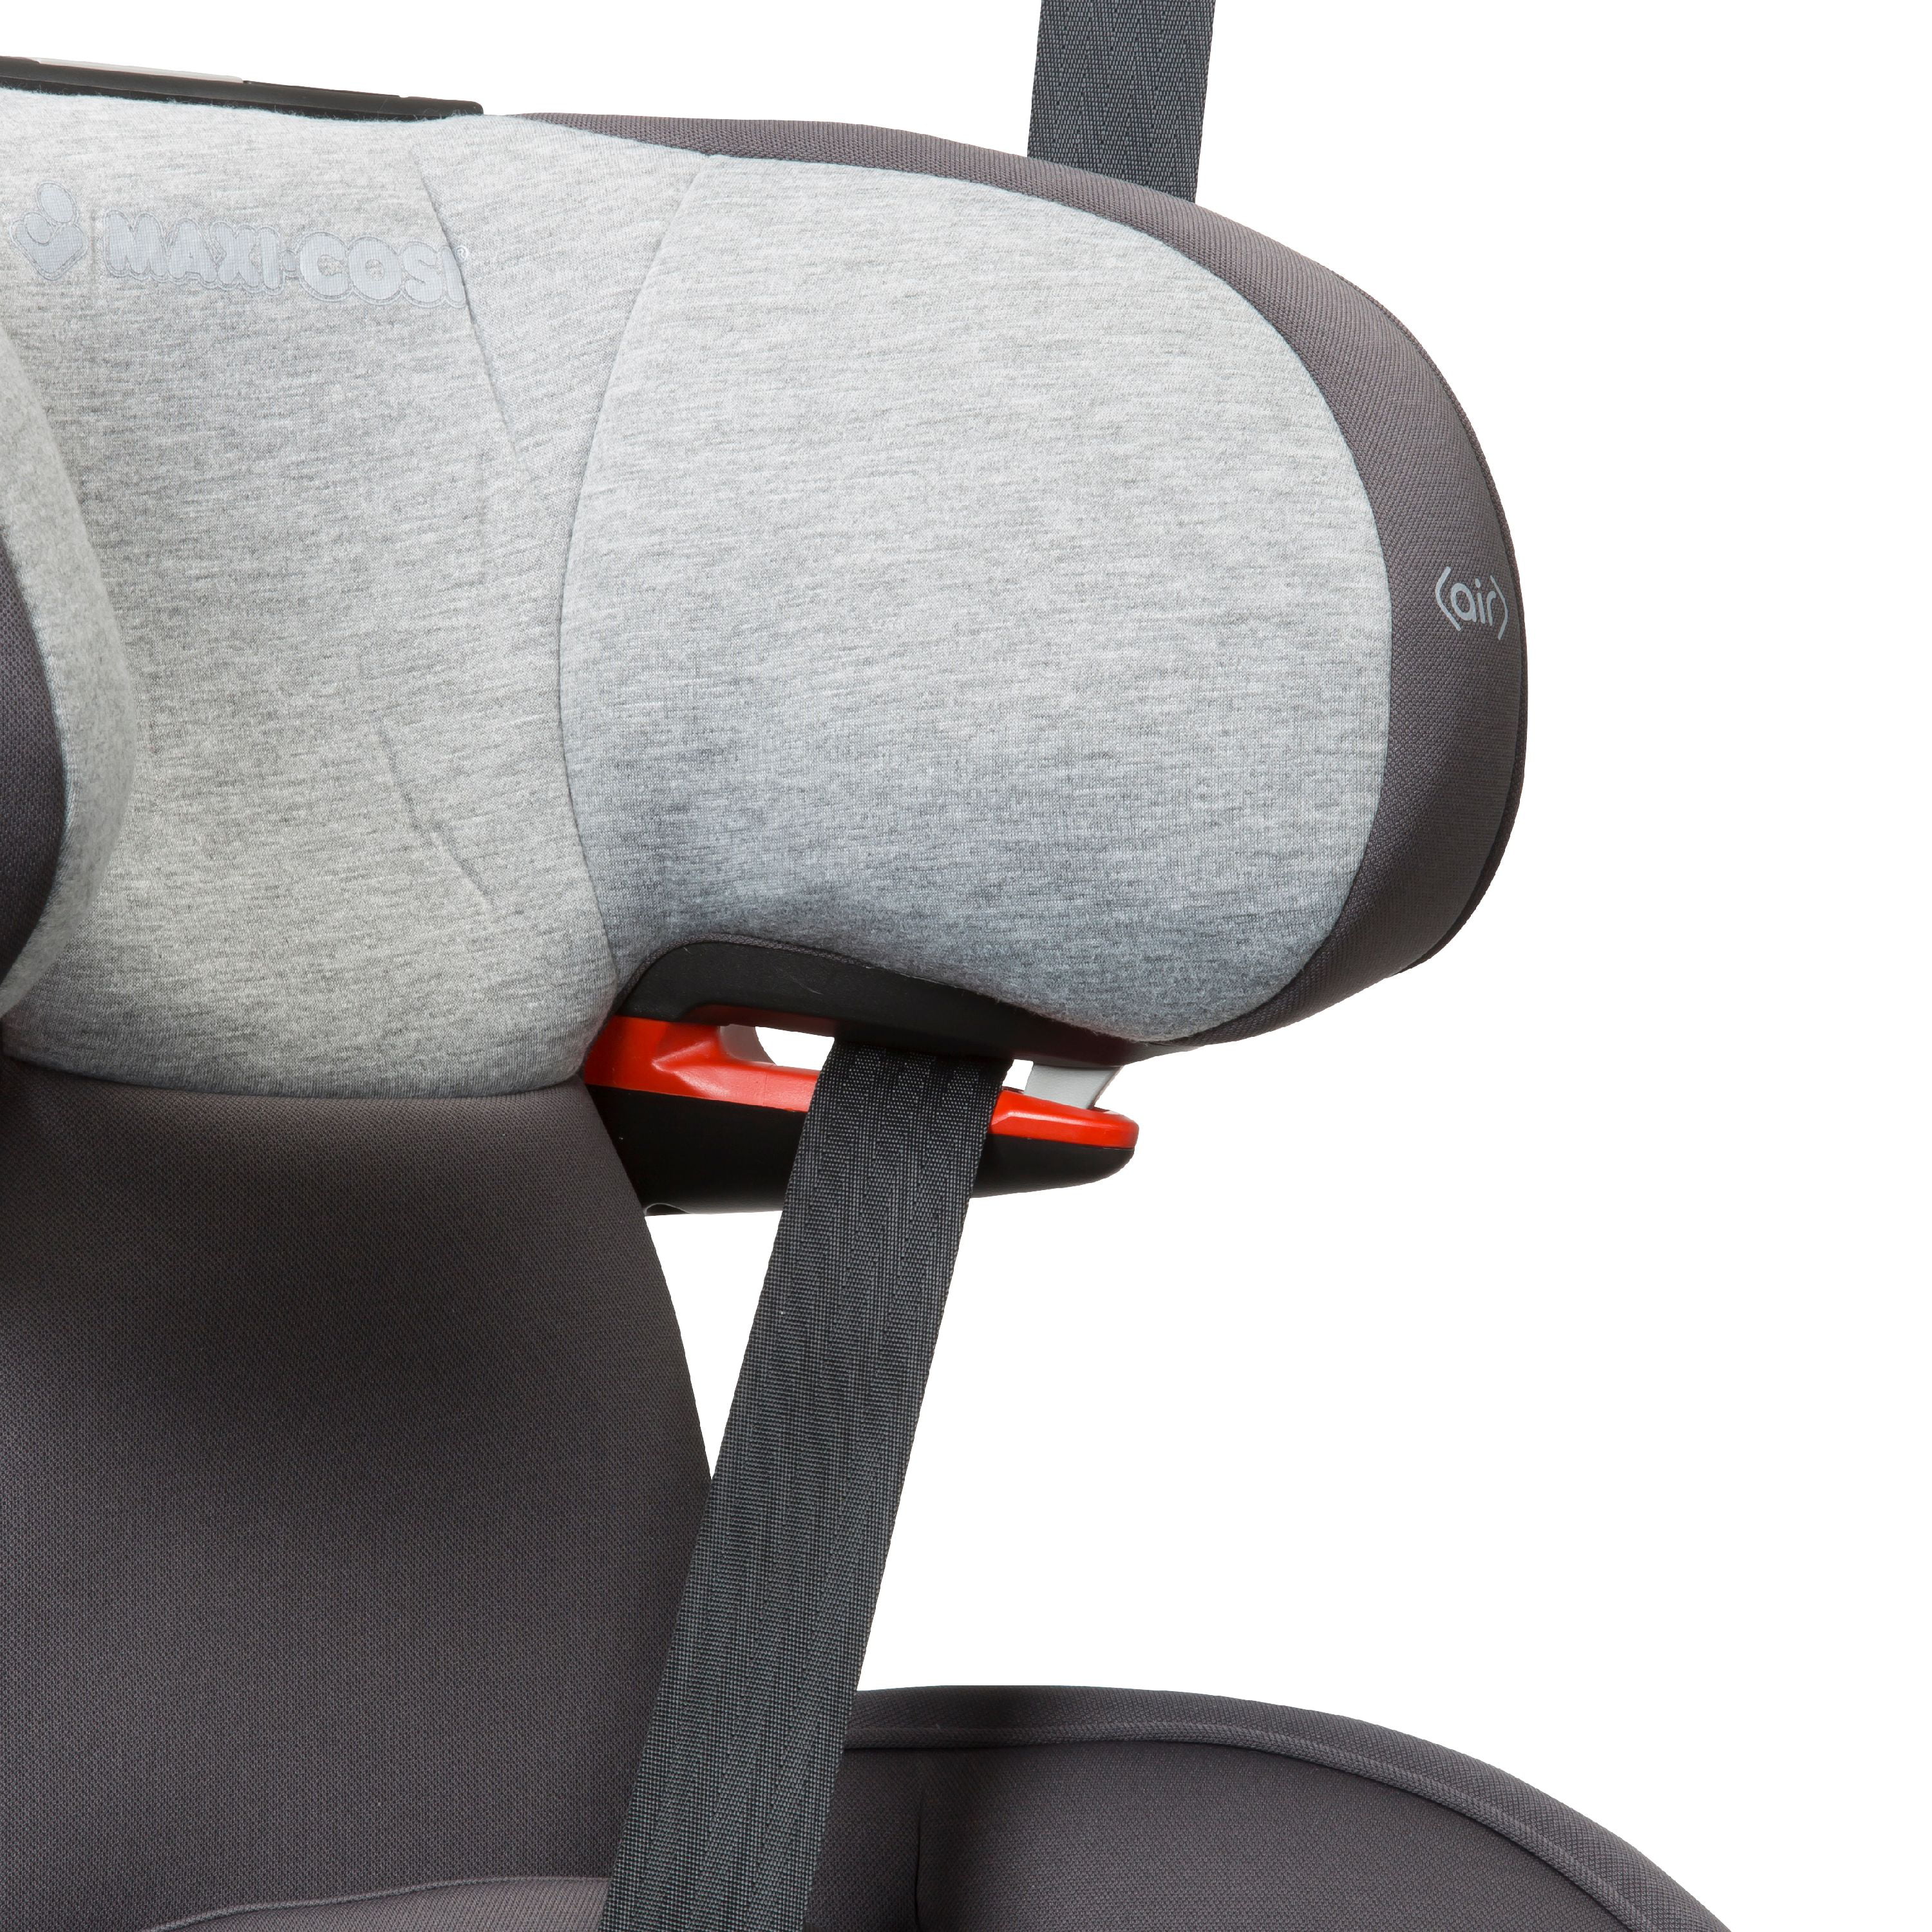 Maxi Cosi RodiFix Air Protect Car Seat for sale in Co. Cork for €70